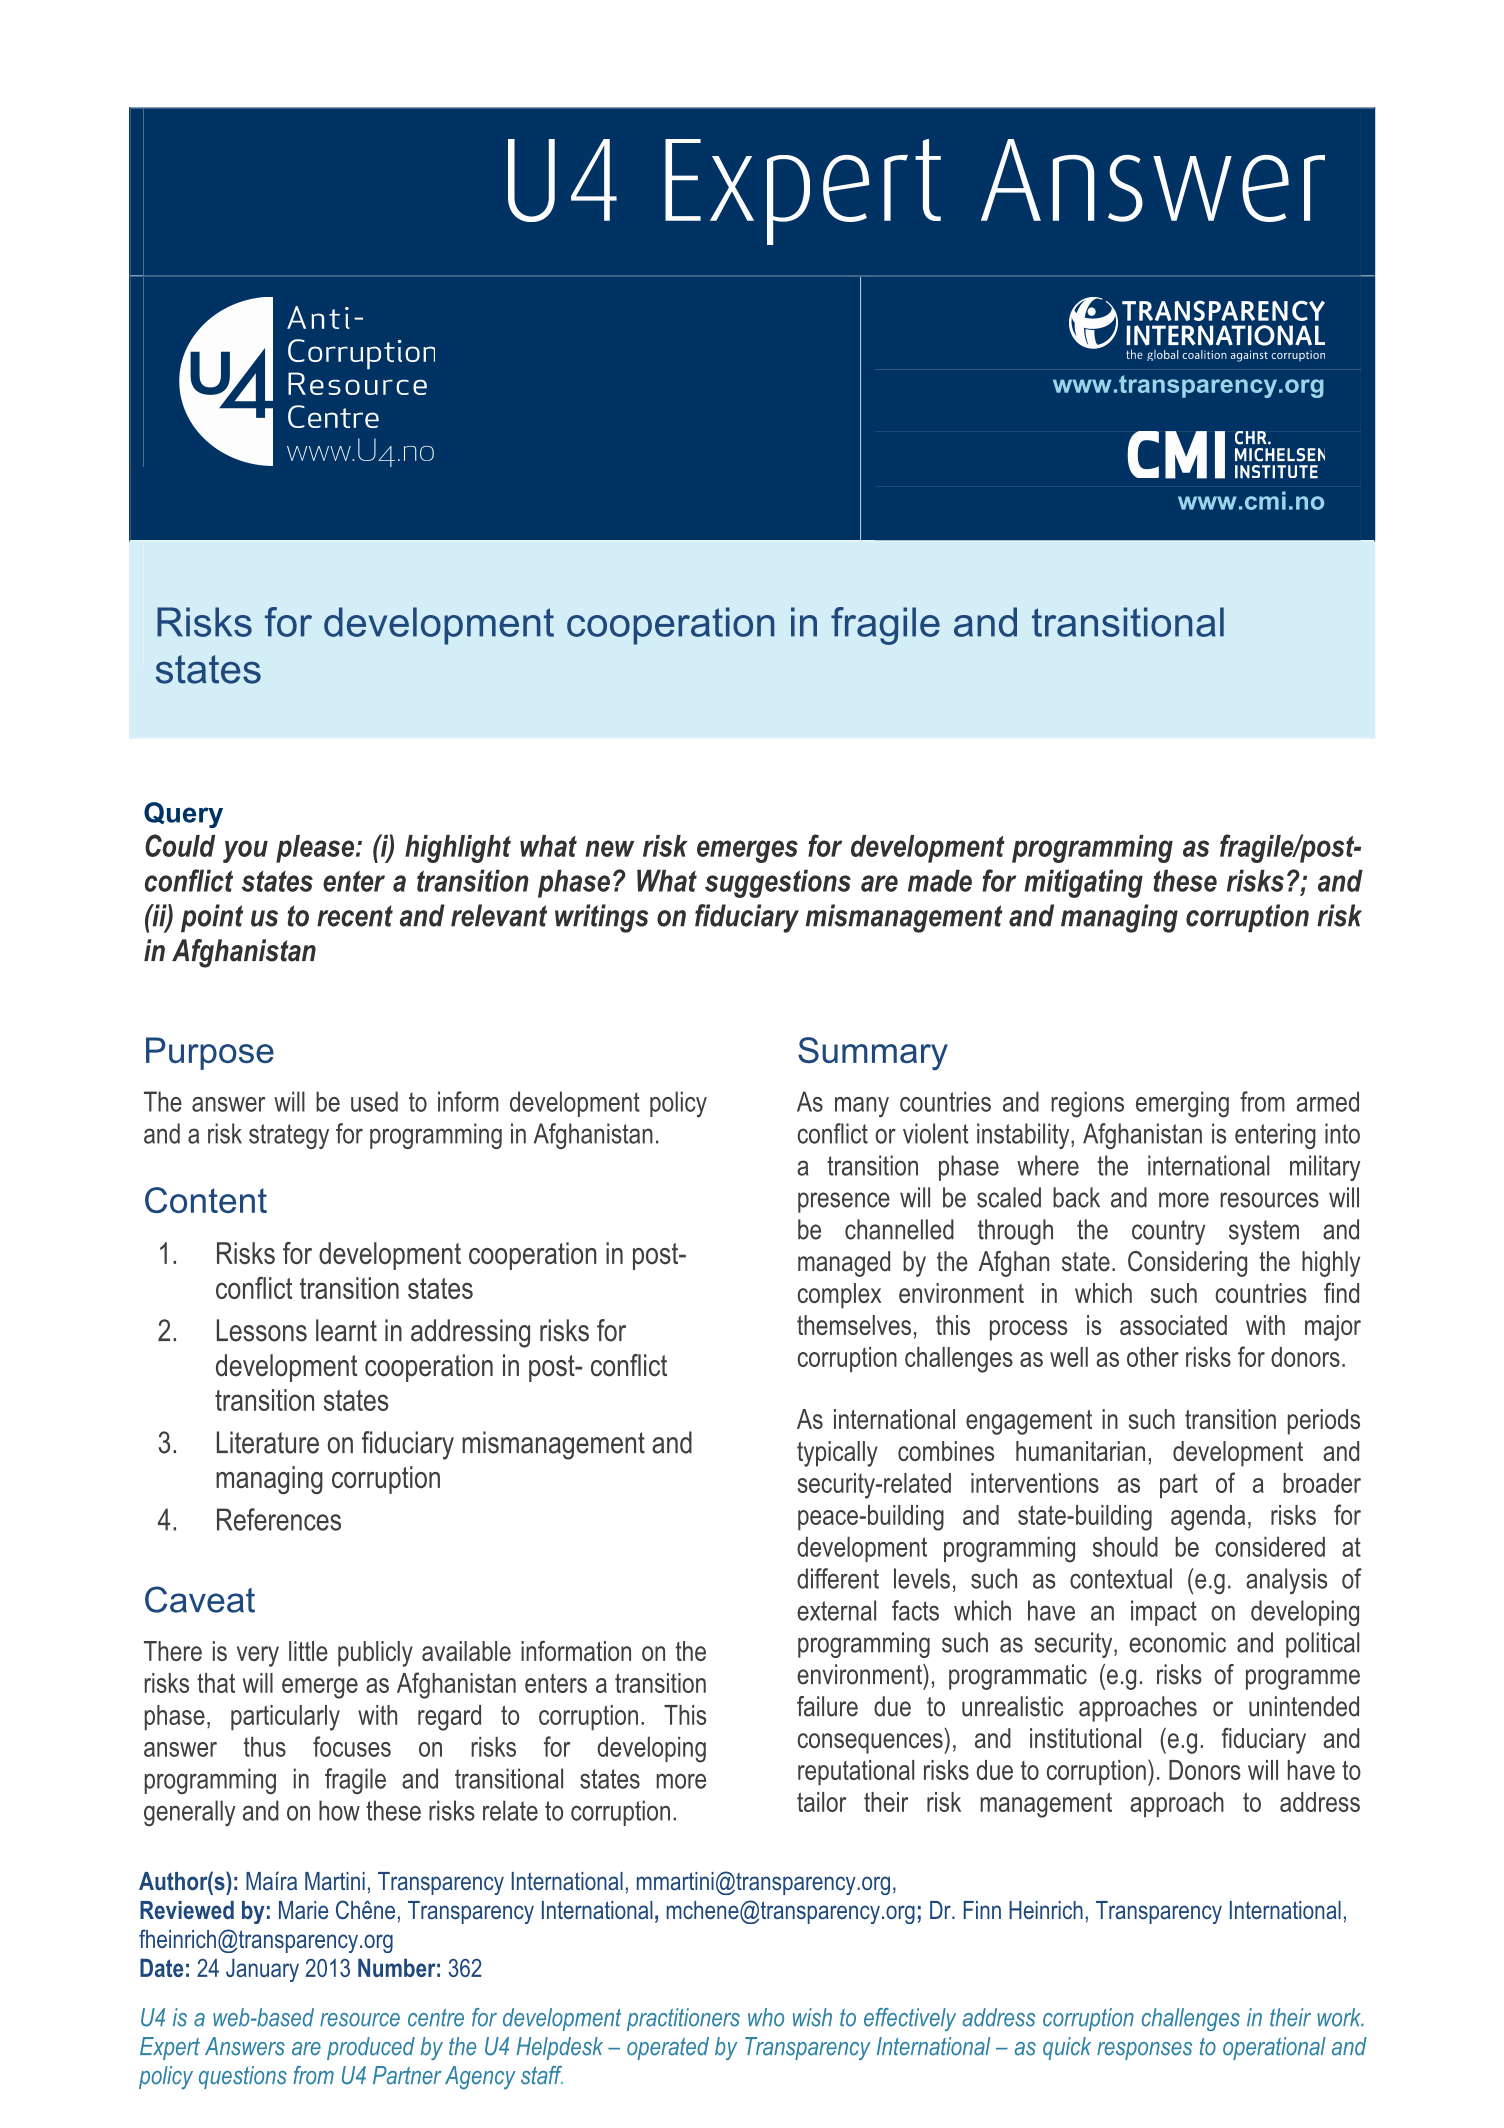 Risks for development cooperation in fragile and transitional states